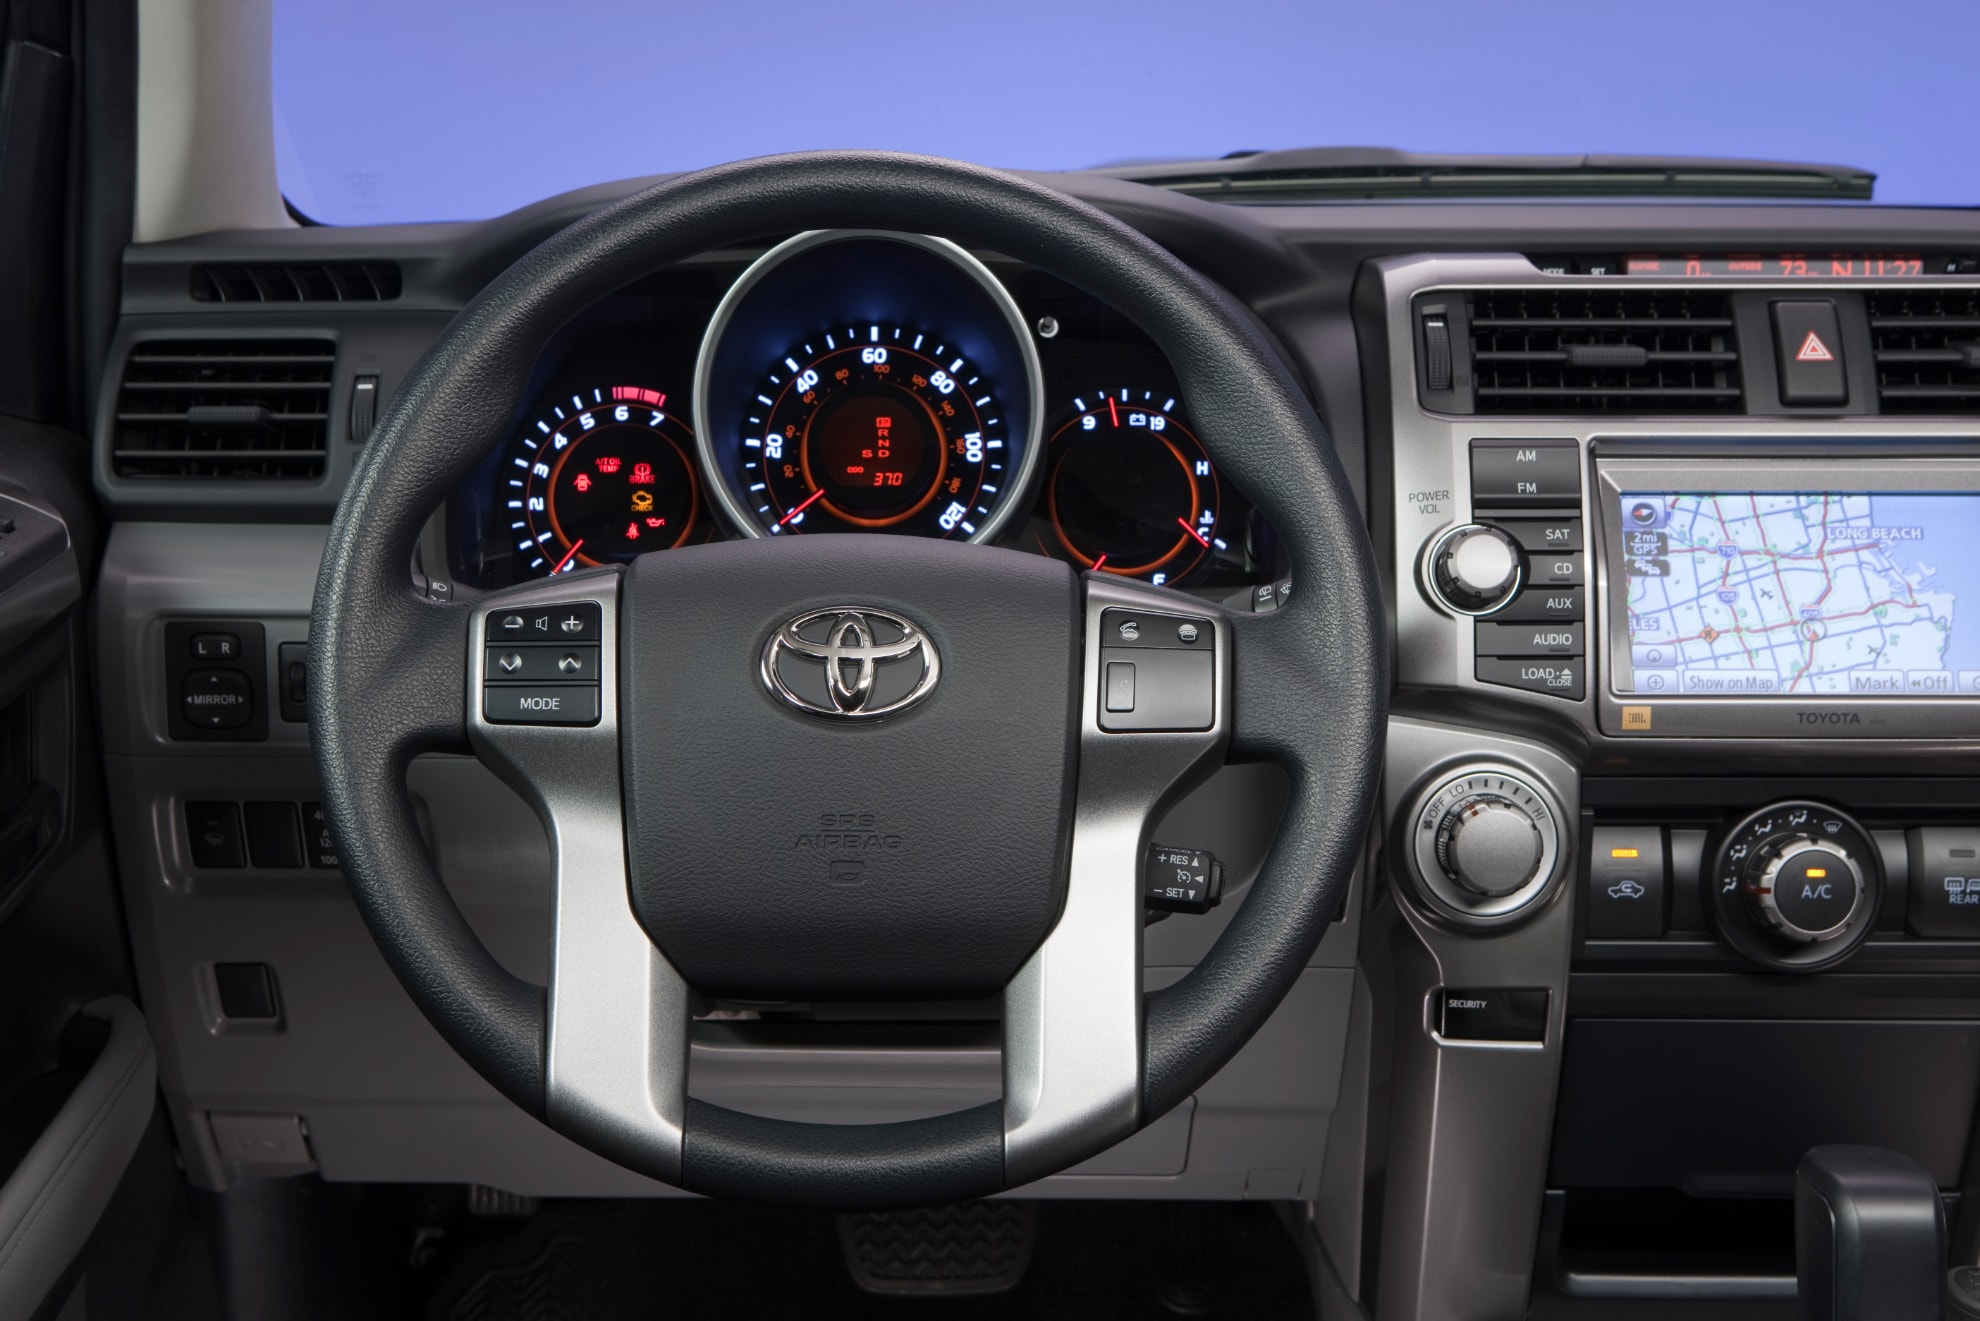 Toyota safety recall and car service information